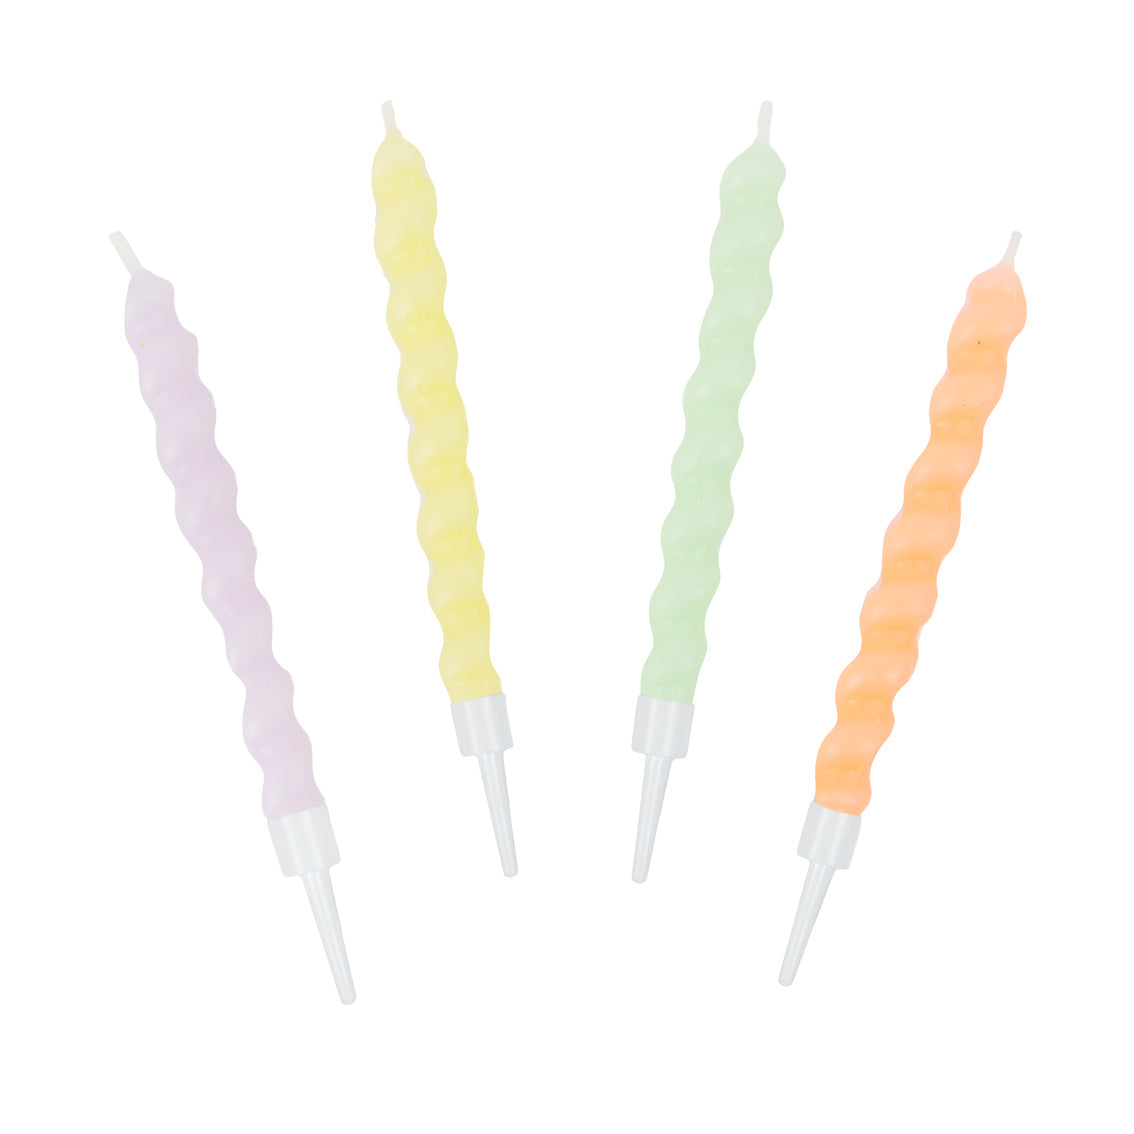 Pastel Twirl Birthday Candles 8 Pk from penny black